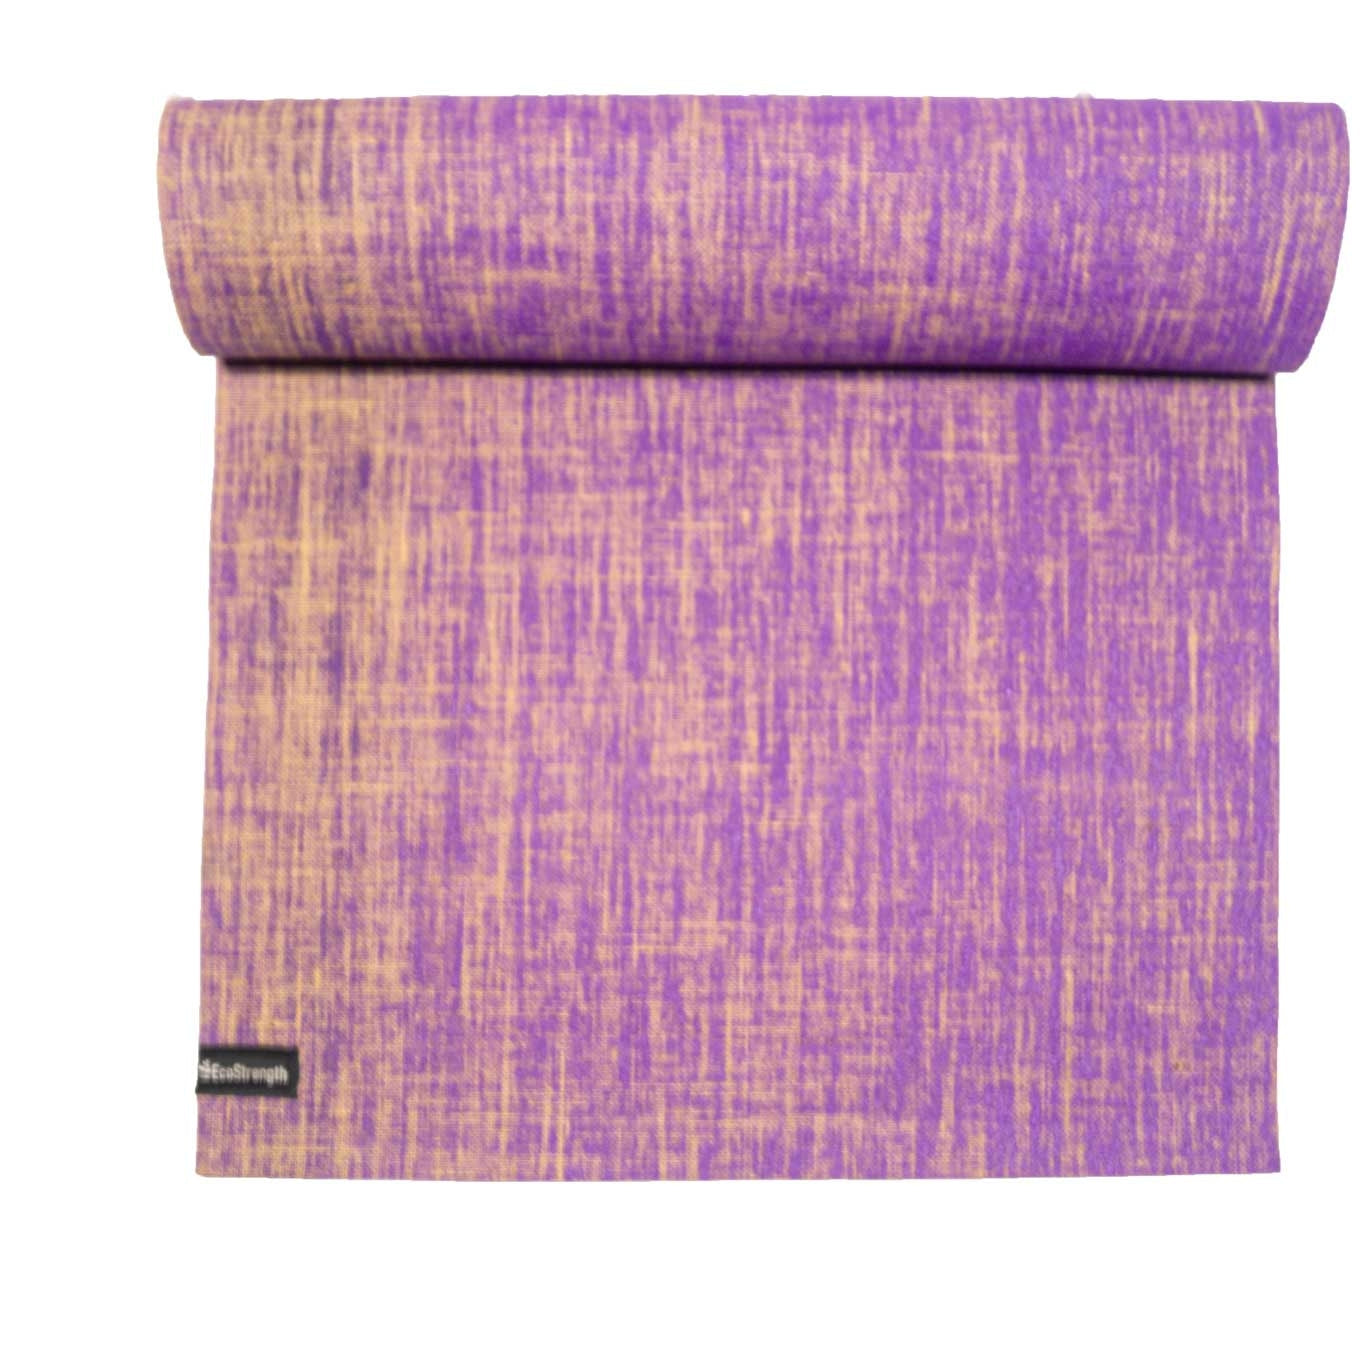 What Are Jute Yoga Mats? All About Jute: The Versatile and